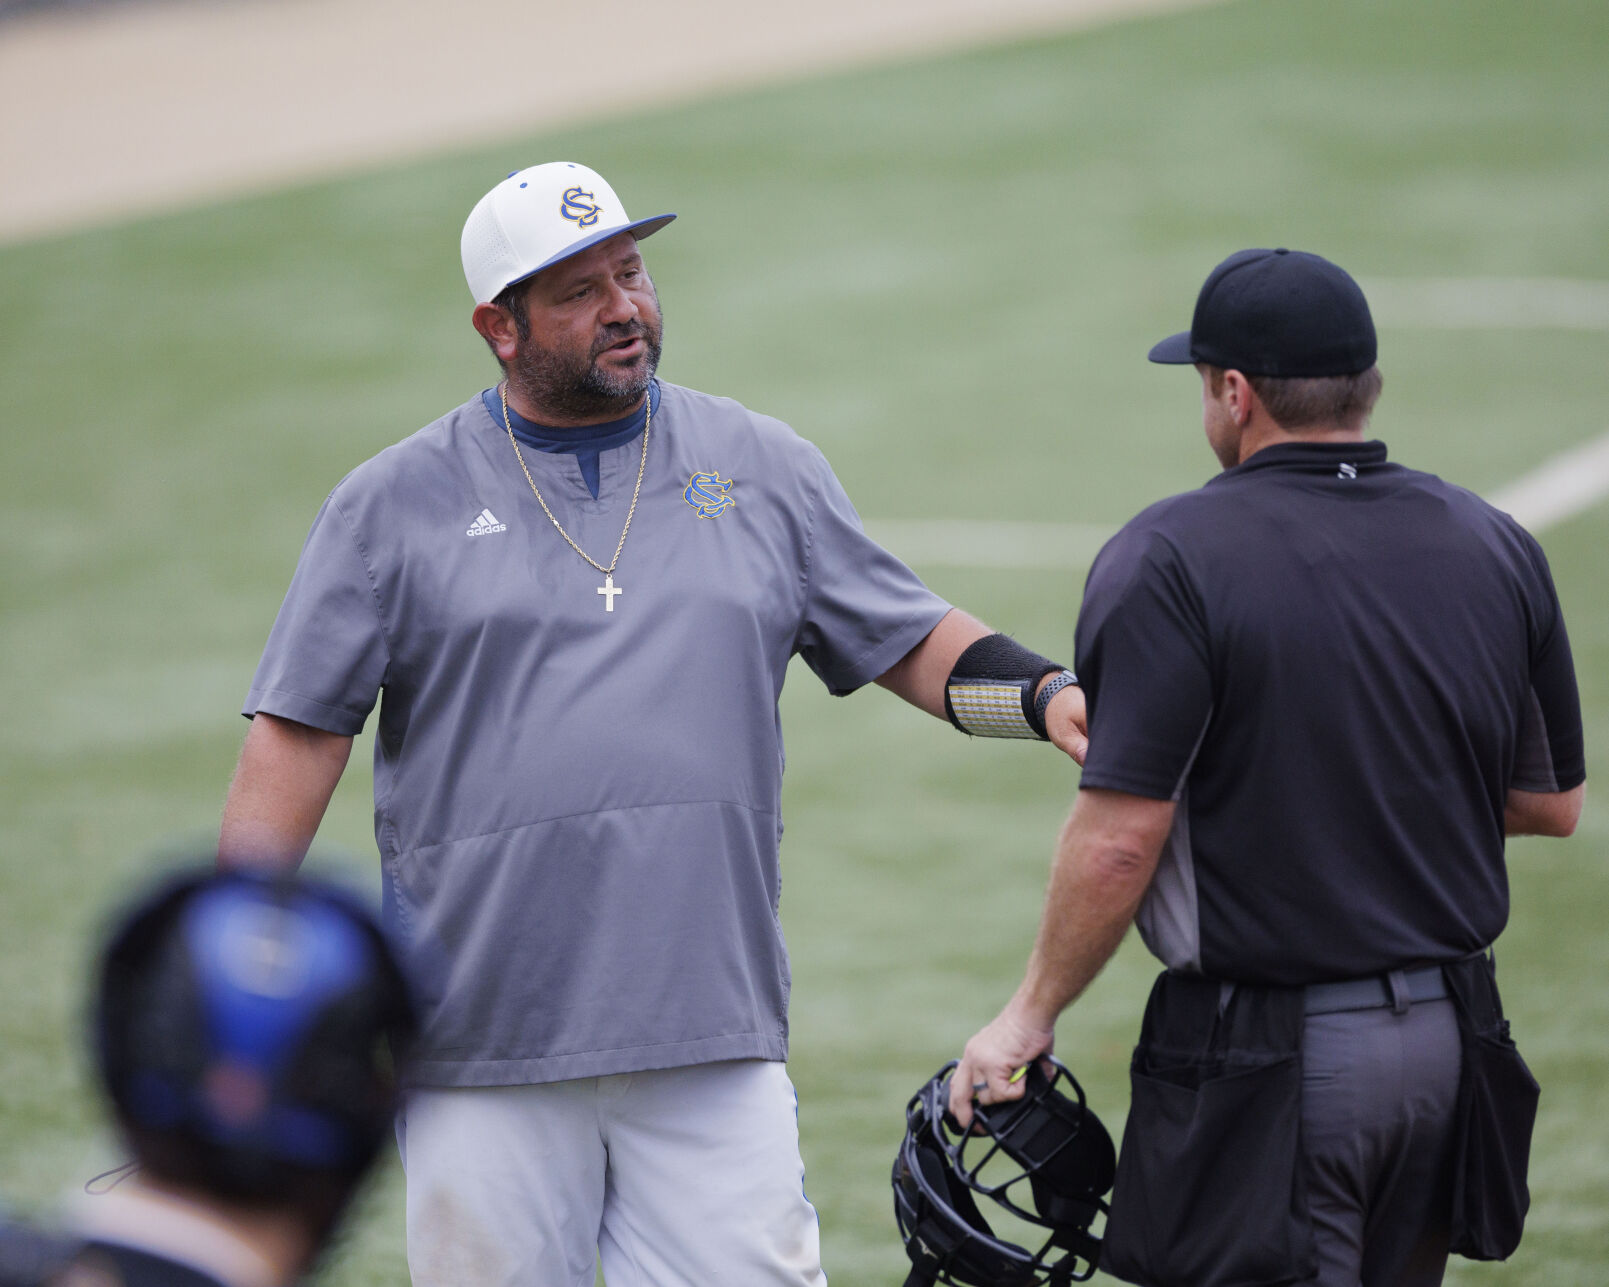 St. Charles Baseball Coach Wayne Stein Commits to Another Season